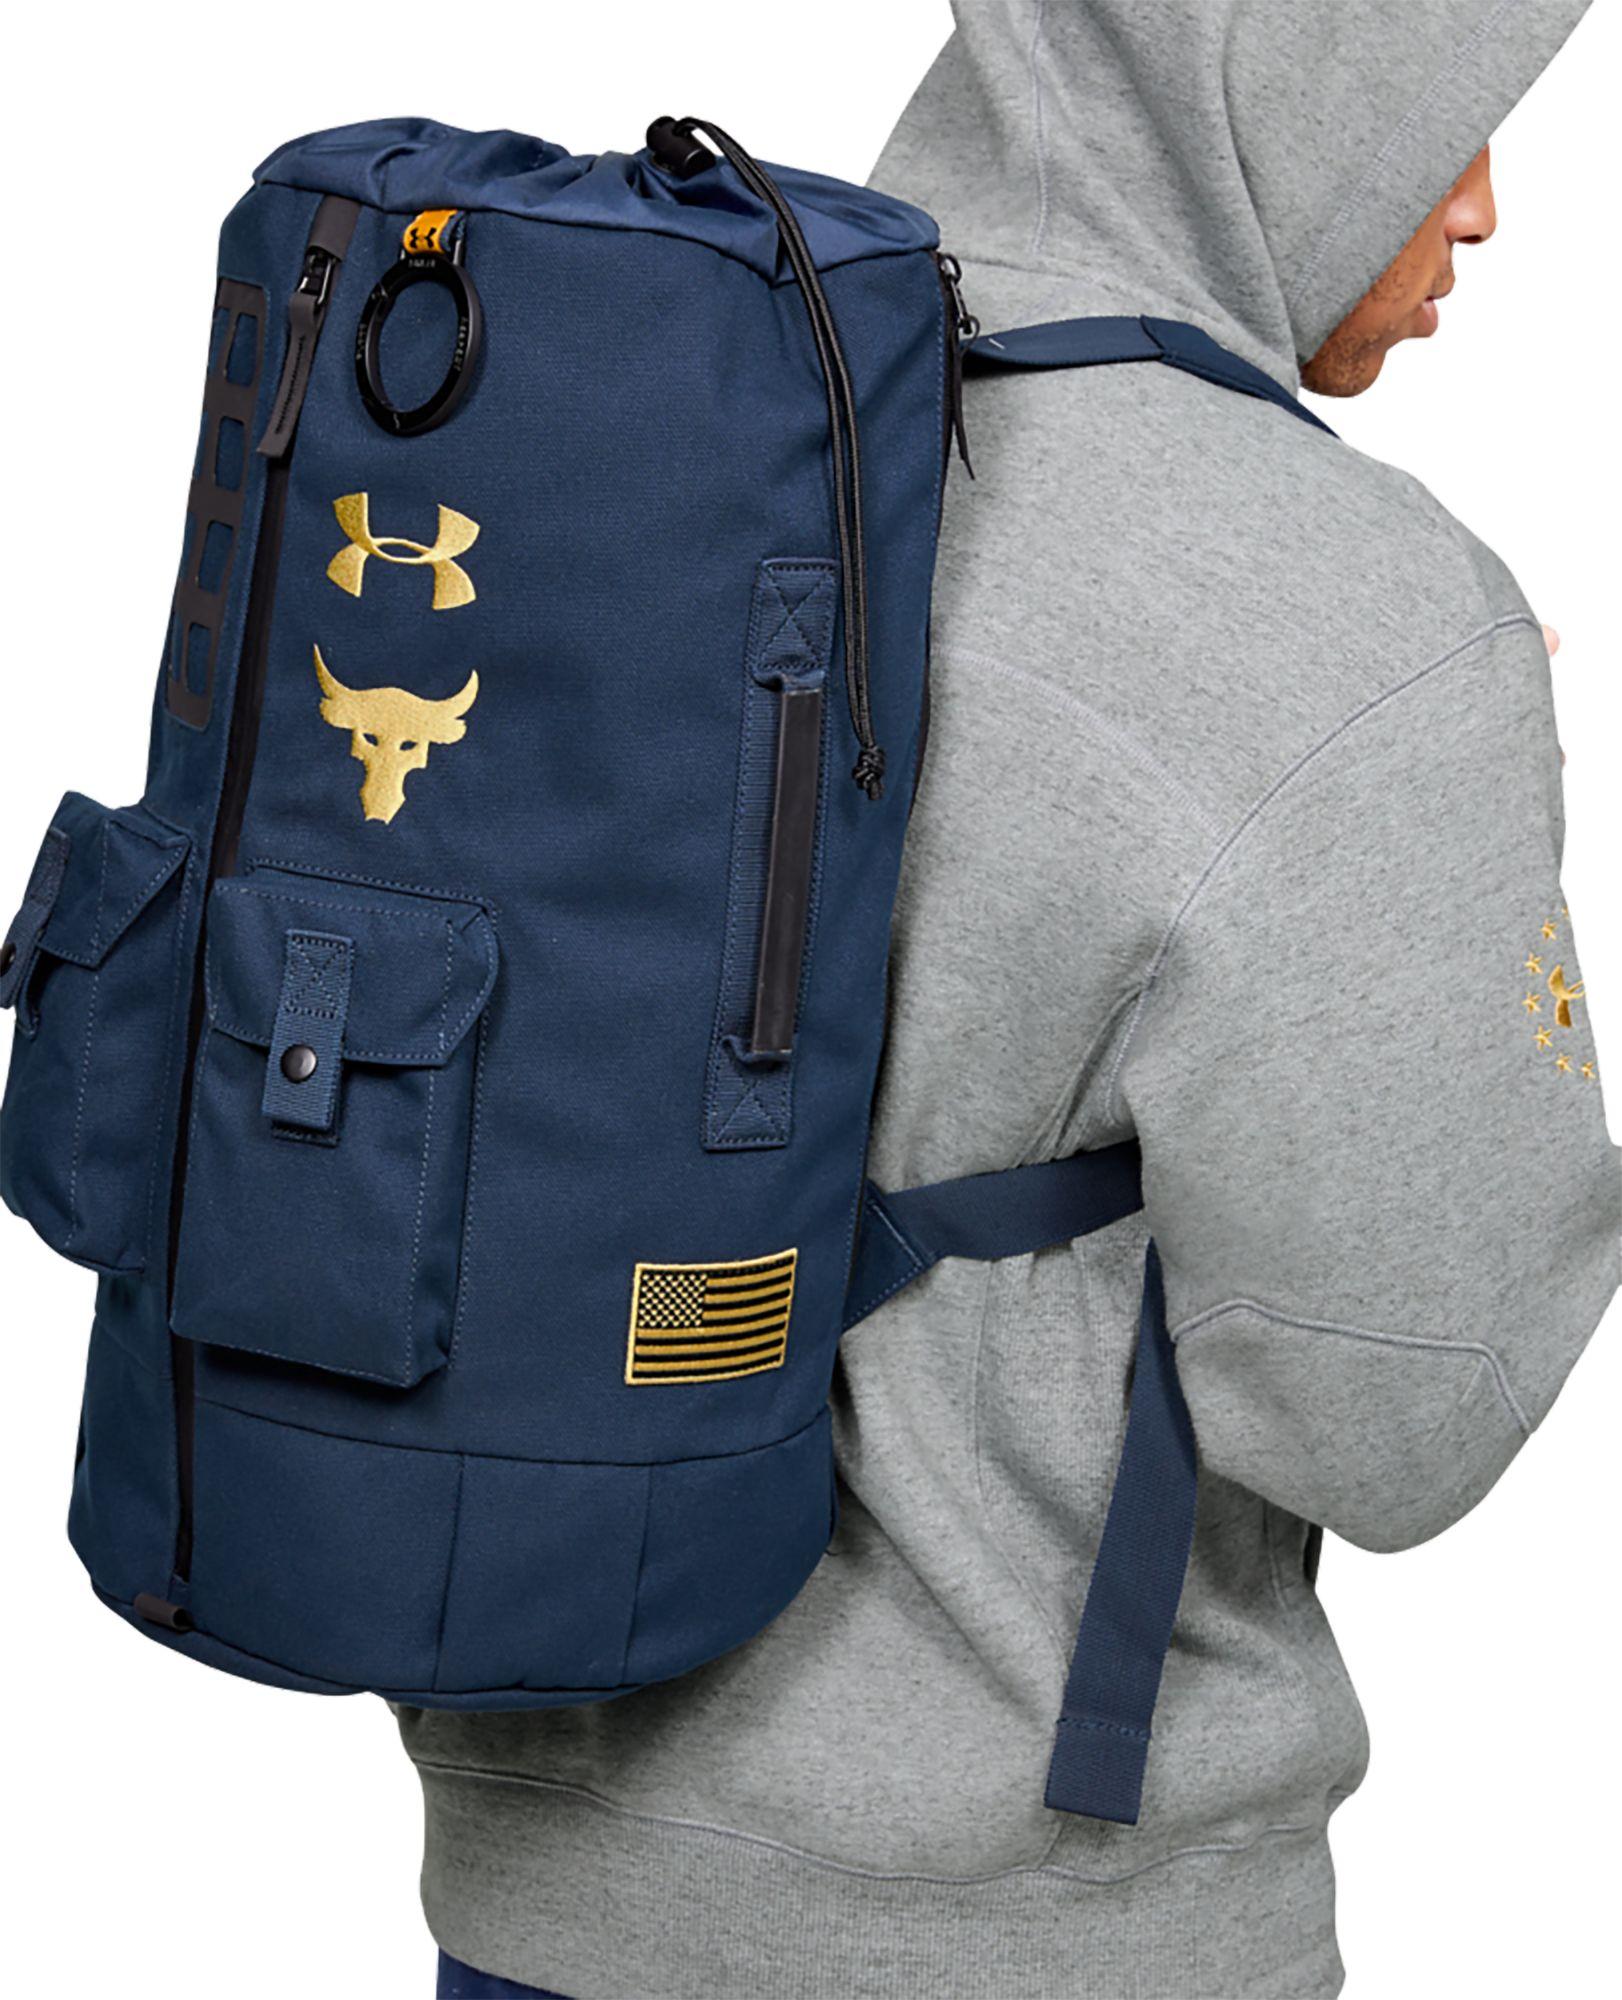 Under Armour Project Rock 60 Gym Bag in Blue for Men - Lyst